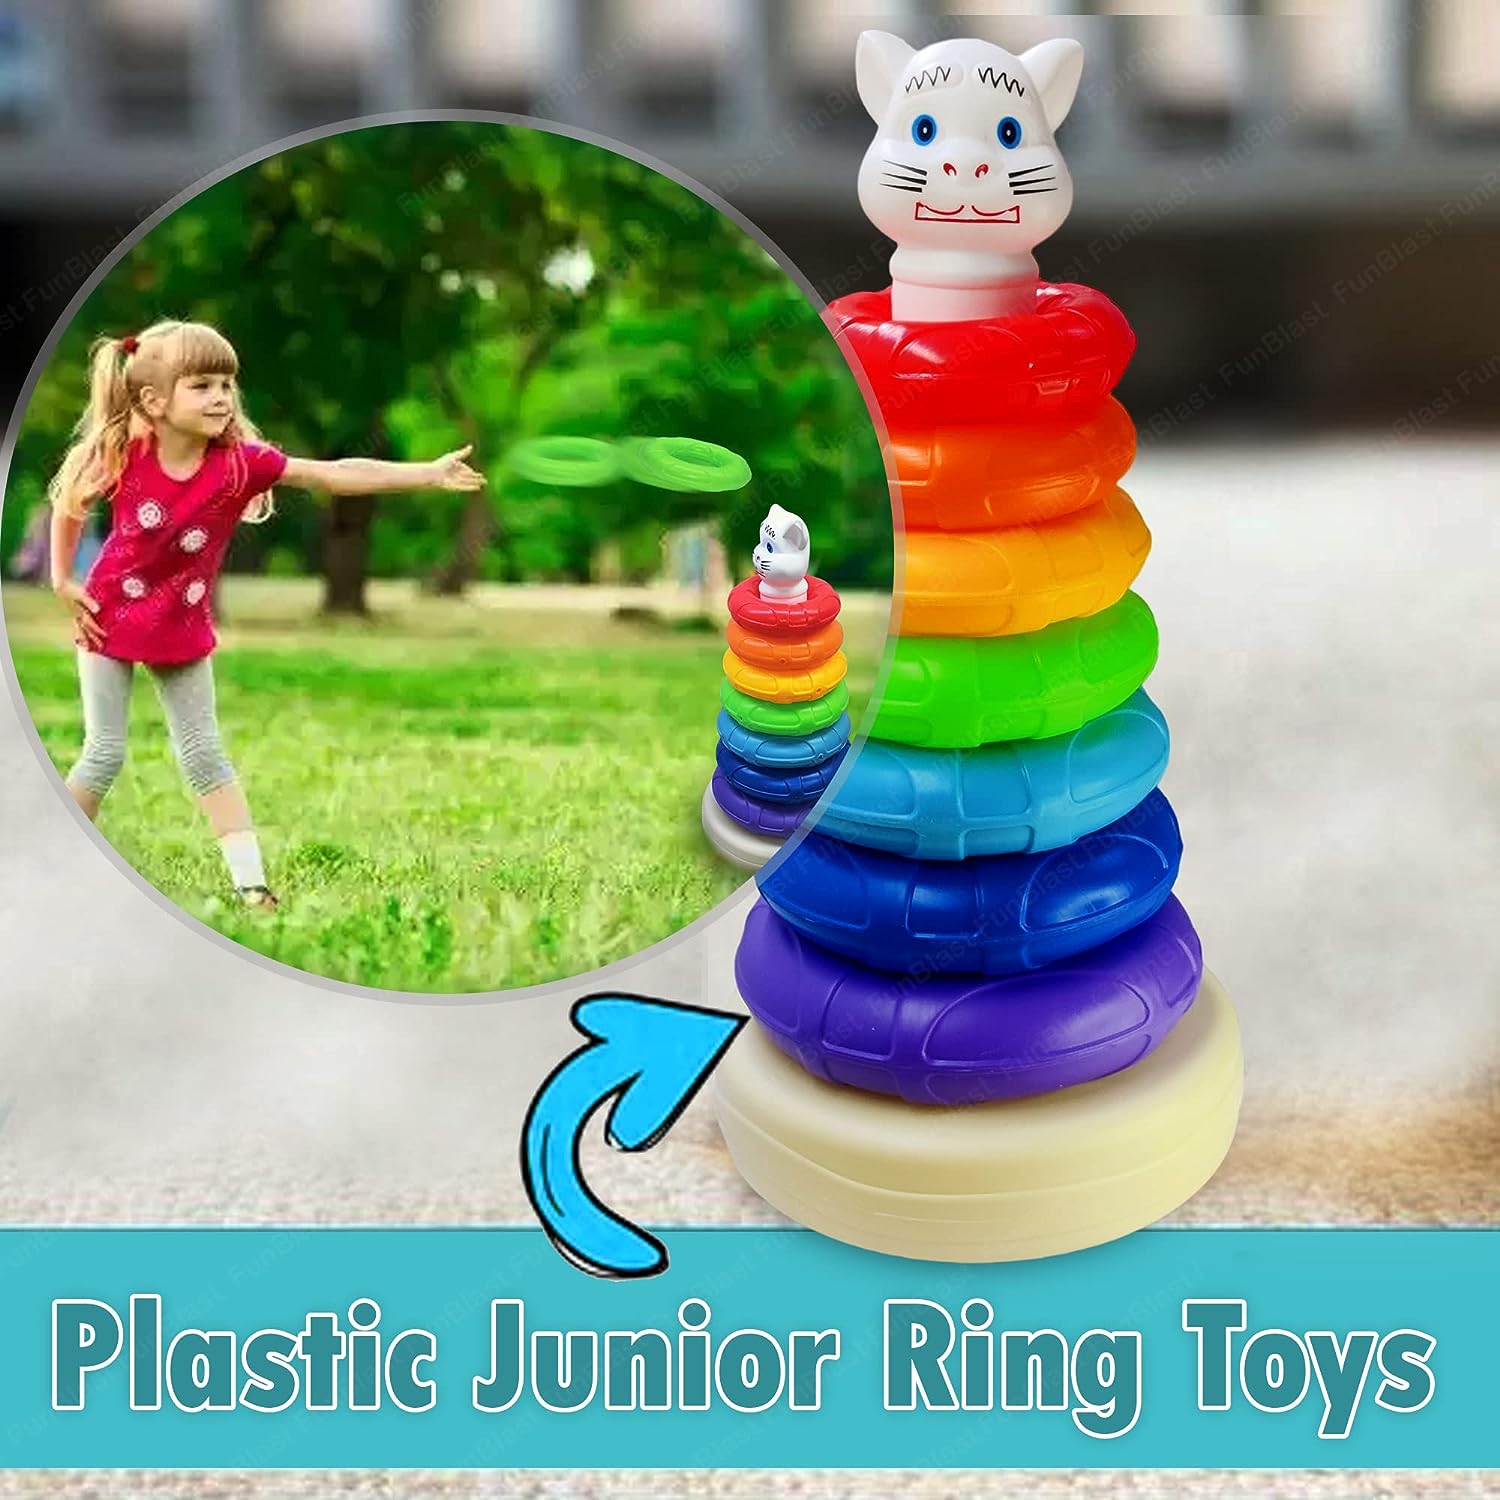 Plastic Baby Kids Teddy Stacking Ring Jumbo Stack Up Educational Toy 5pc,  Stacking Rings Toy, प्लास्टिक तोय रिंग्स - The Little Big Store, Ahmedabad  | ID: 2853290458197